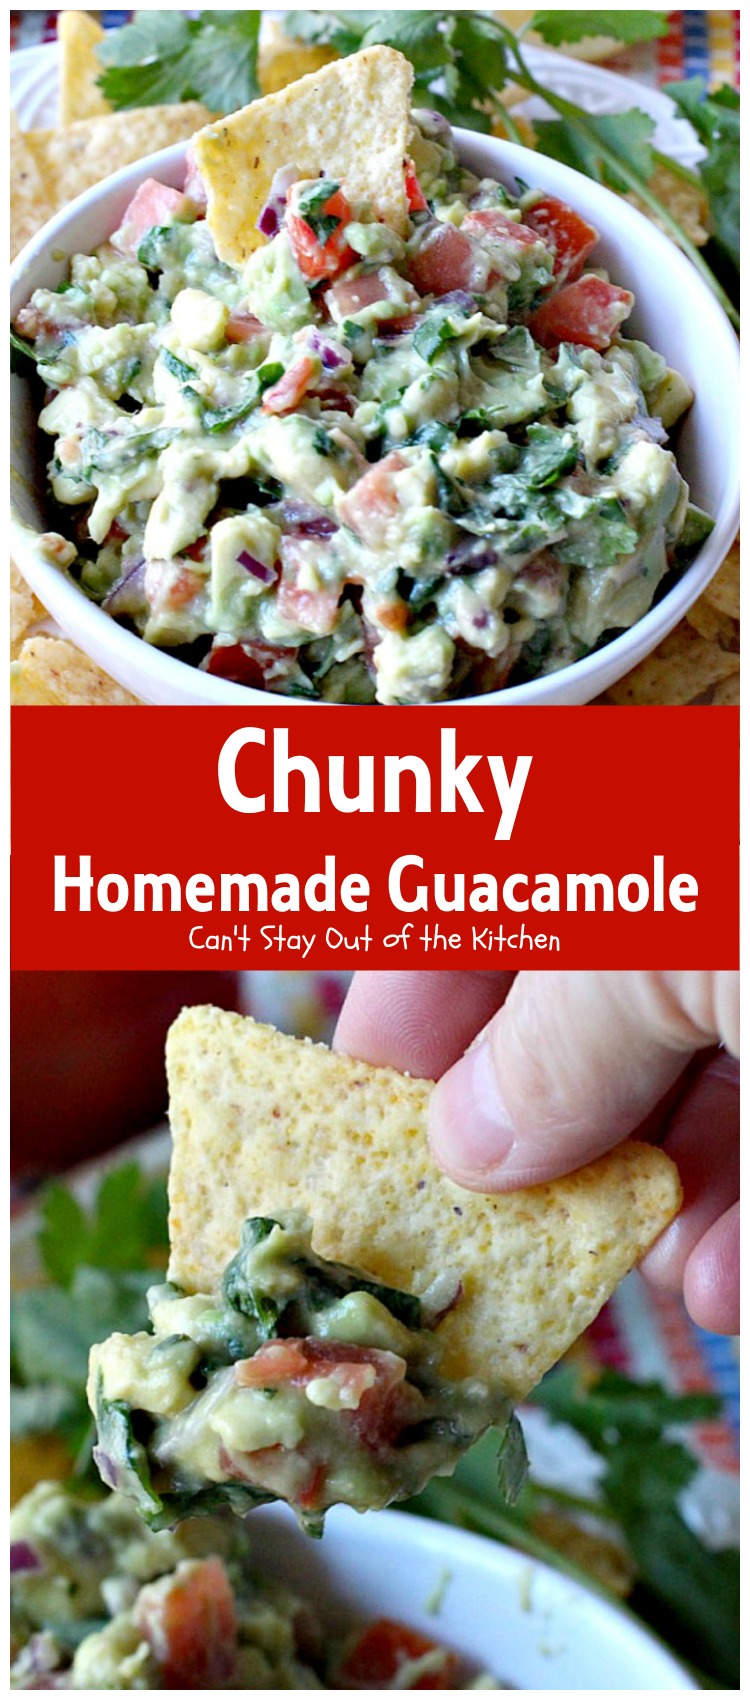 Guacamole Hummus Cant Stay Out Of The Kitchen